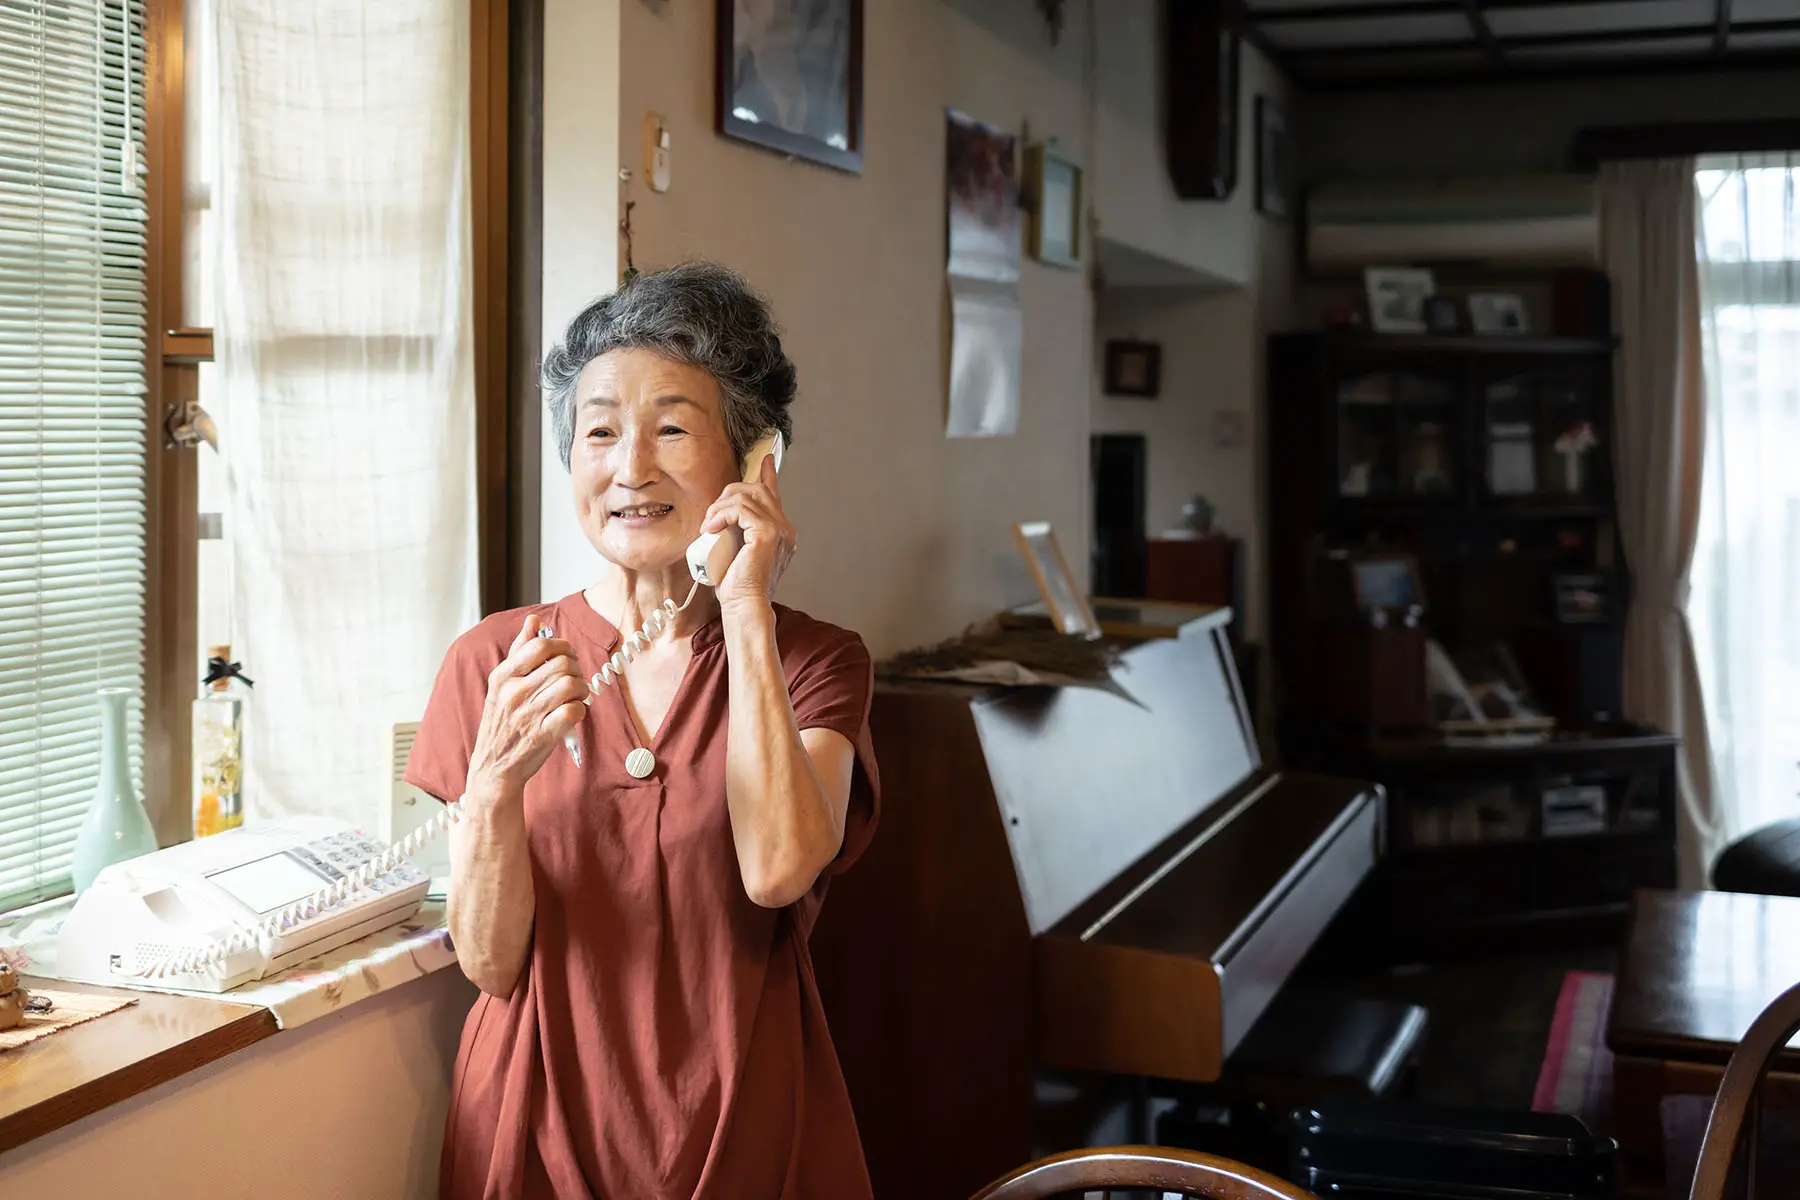 Old woman standing near a window and speaking on a landline telephone.